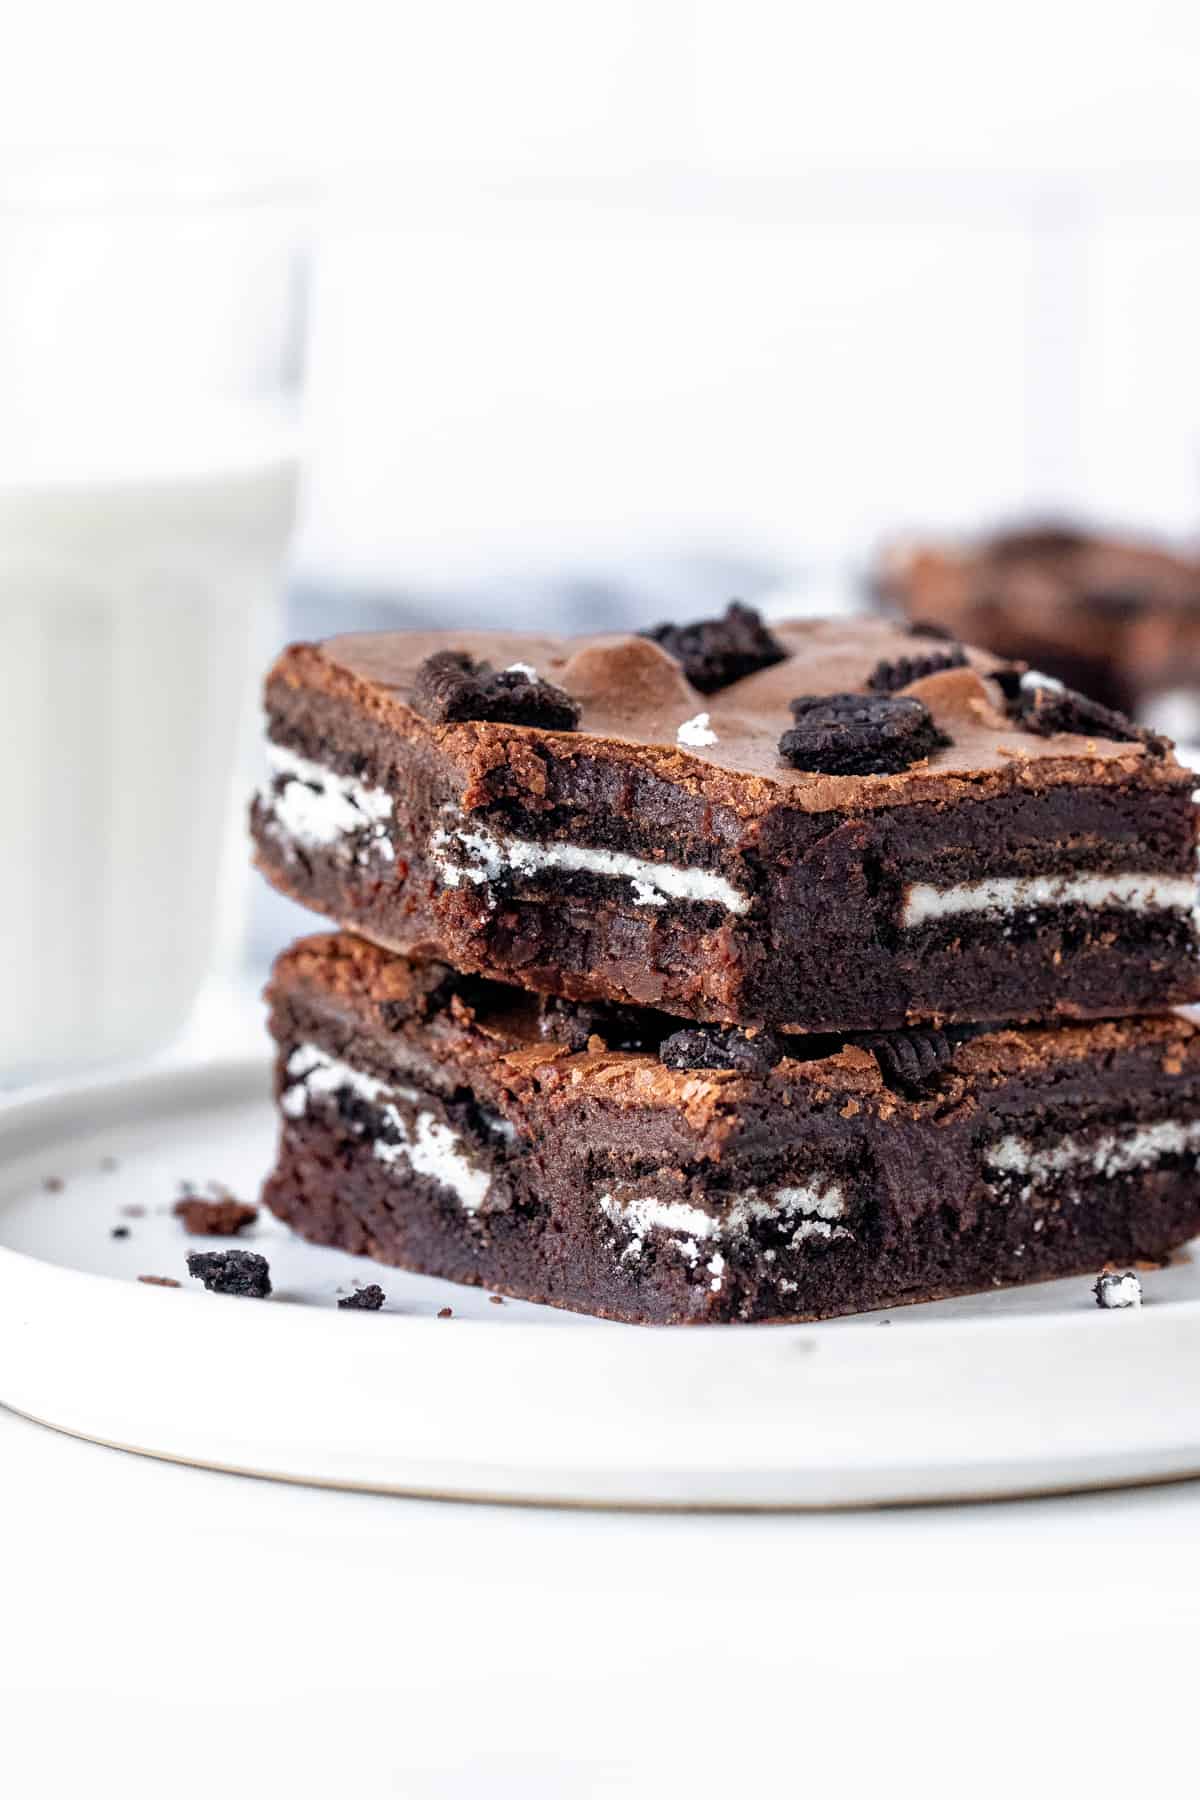 2 Oreo stuffed brownies stacked on top of each other